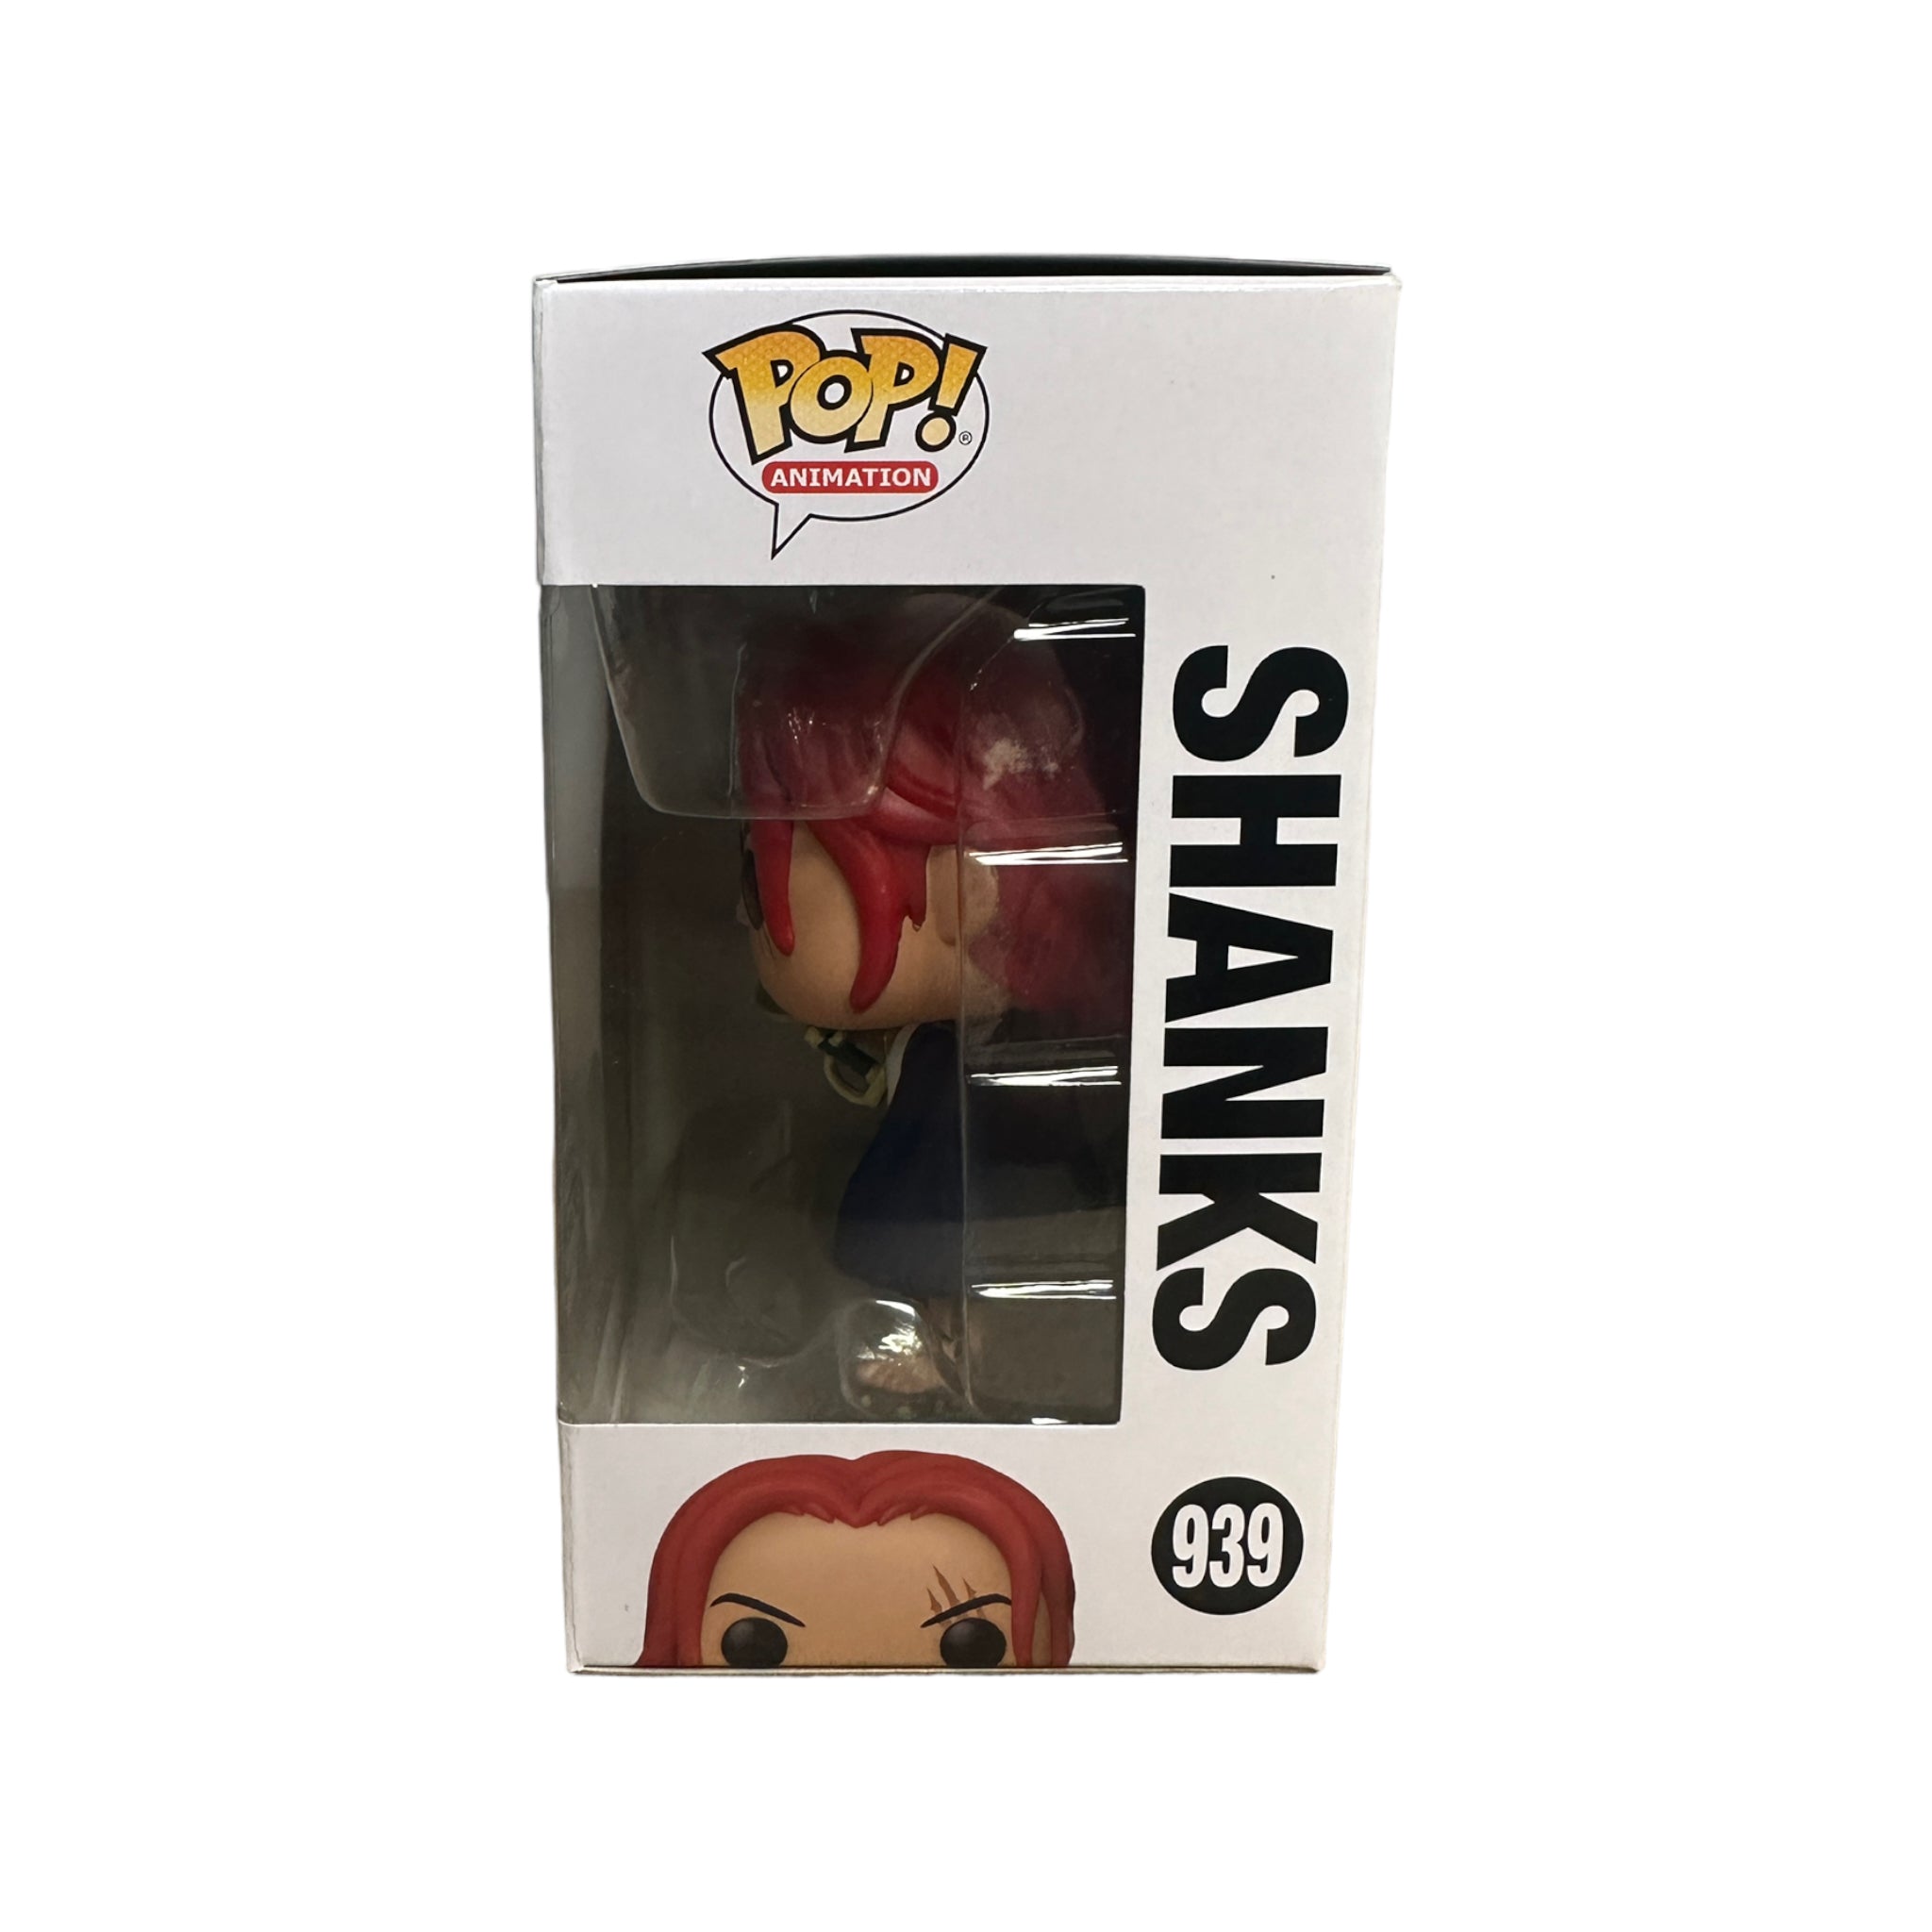 Shanks #939 (w/ Hat Chase) Funko Pop! - One Piece - Special Edition - Condition 9/10